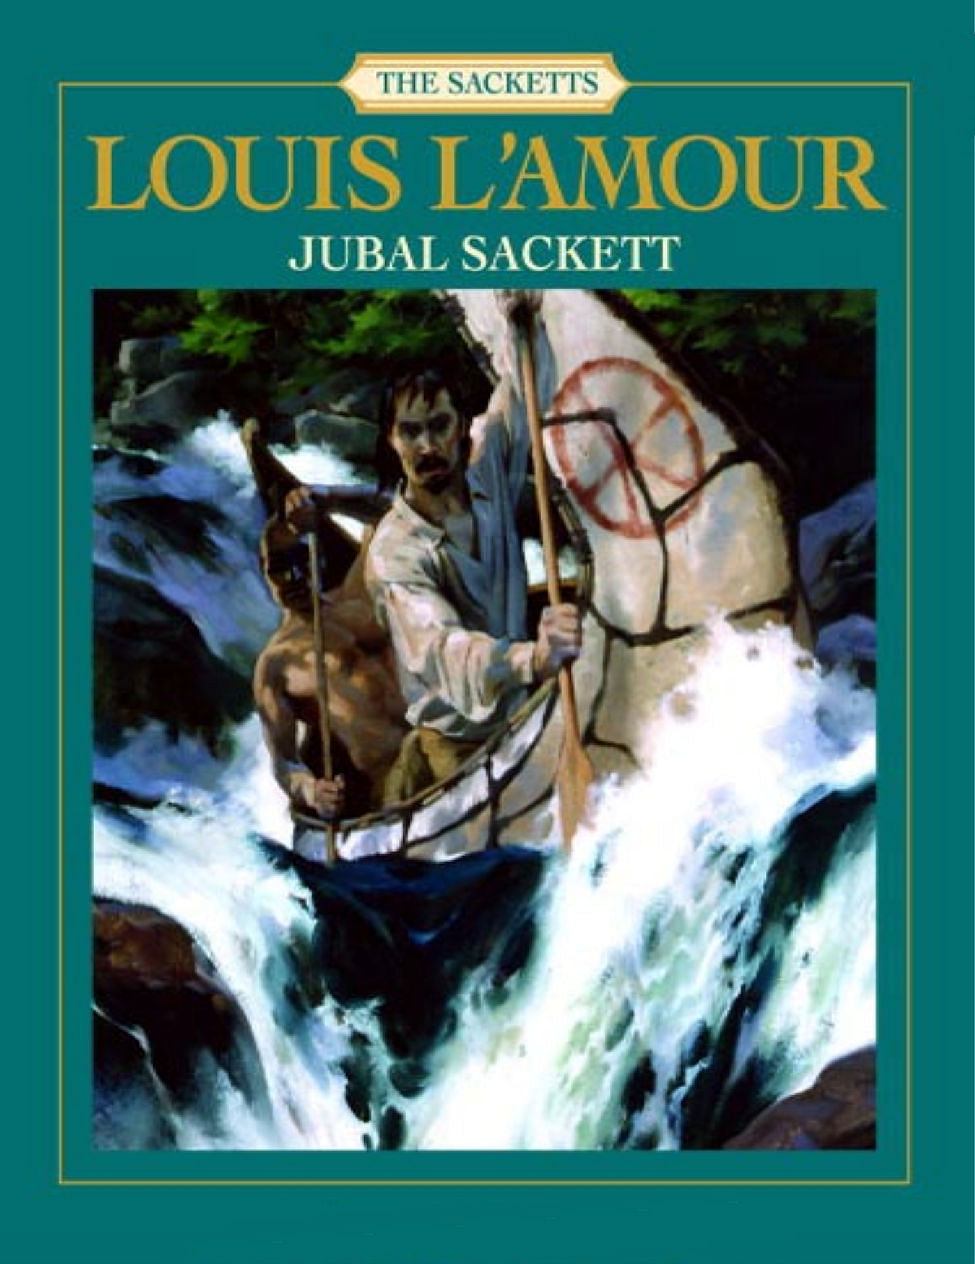 Louis L’Amour’s ‘Jubal Sackett’ taught me that it was ‘cool’ to be the good guy.